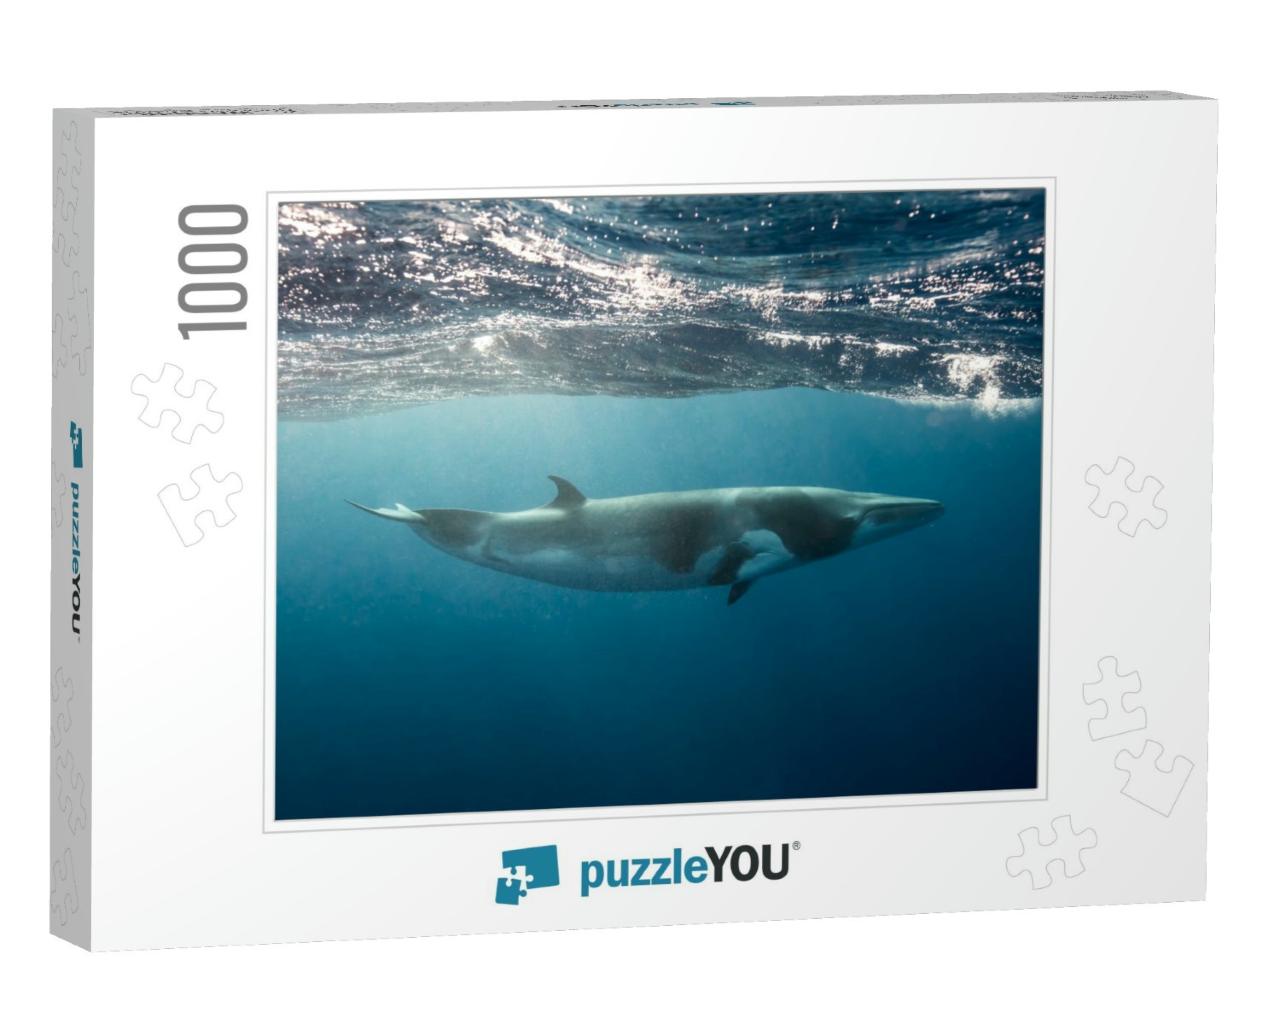 Dwarf Minke Whales, a Small Whale Seen While Snorkeling &... Jigsaw Puzzle with 1000 pieces